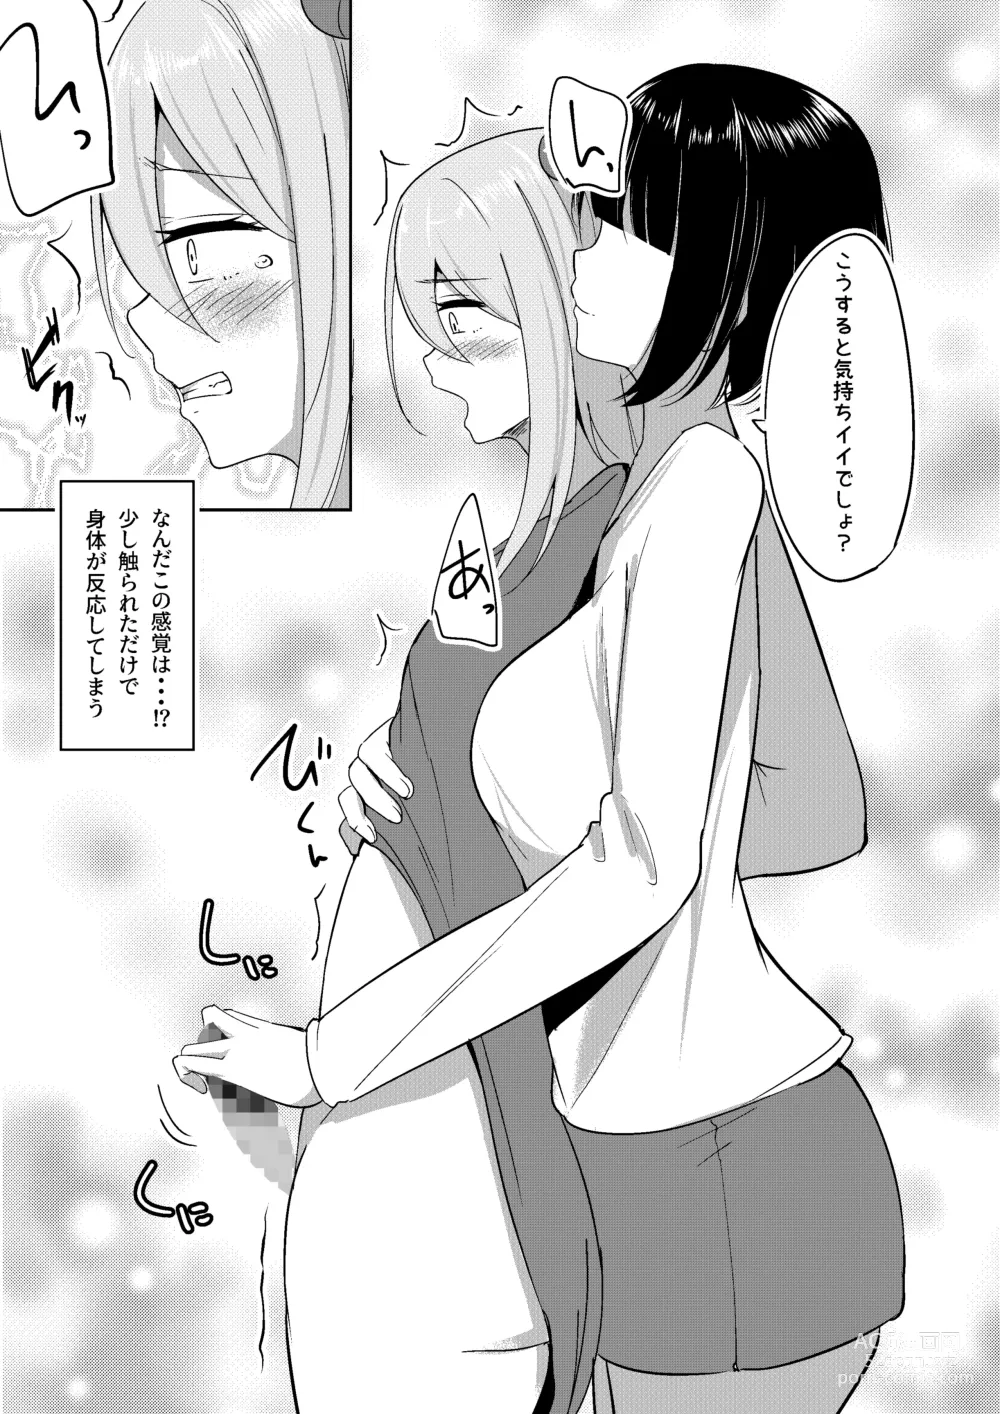 Page 10 of doujinshi Succubus Lily 2